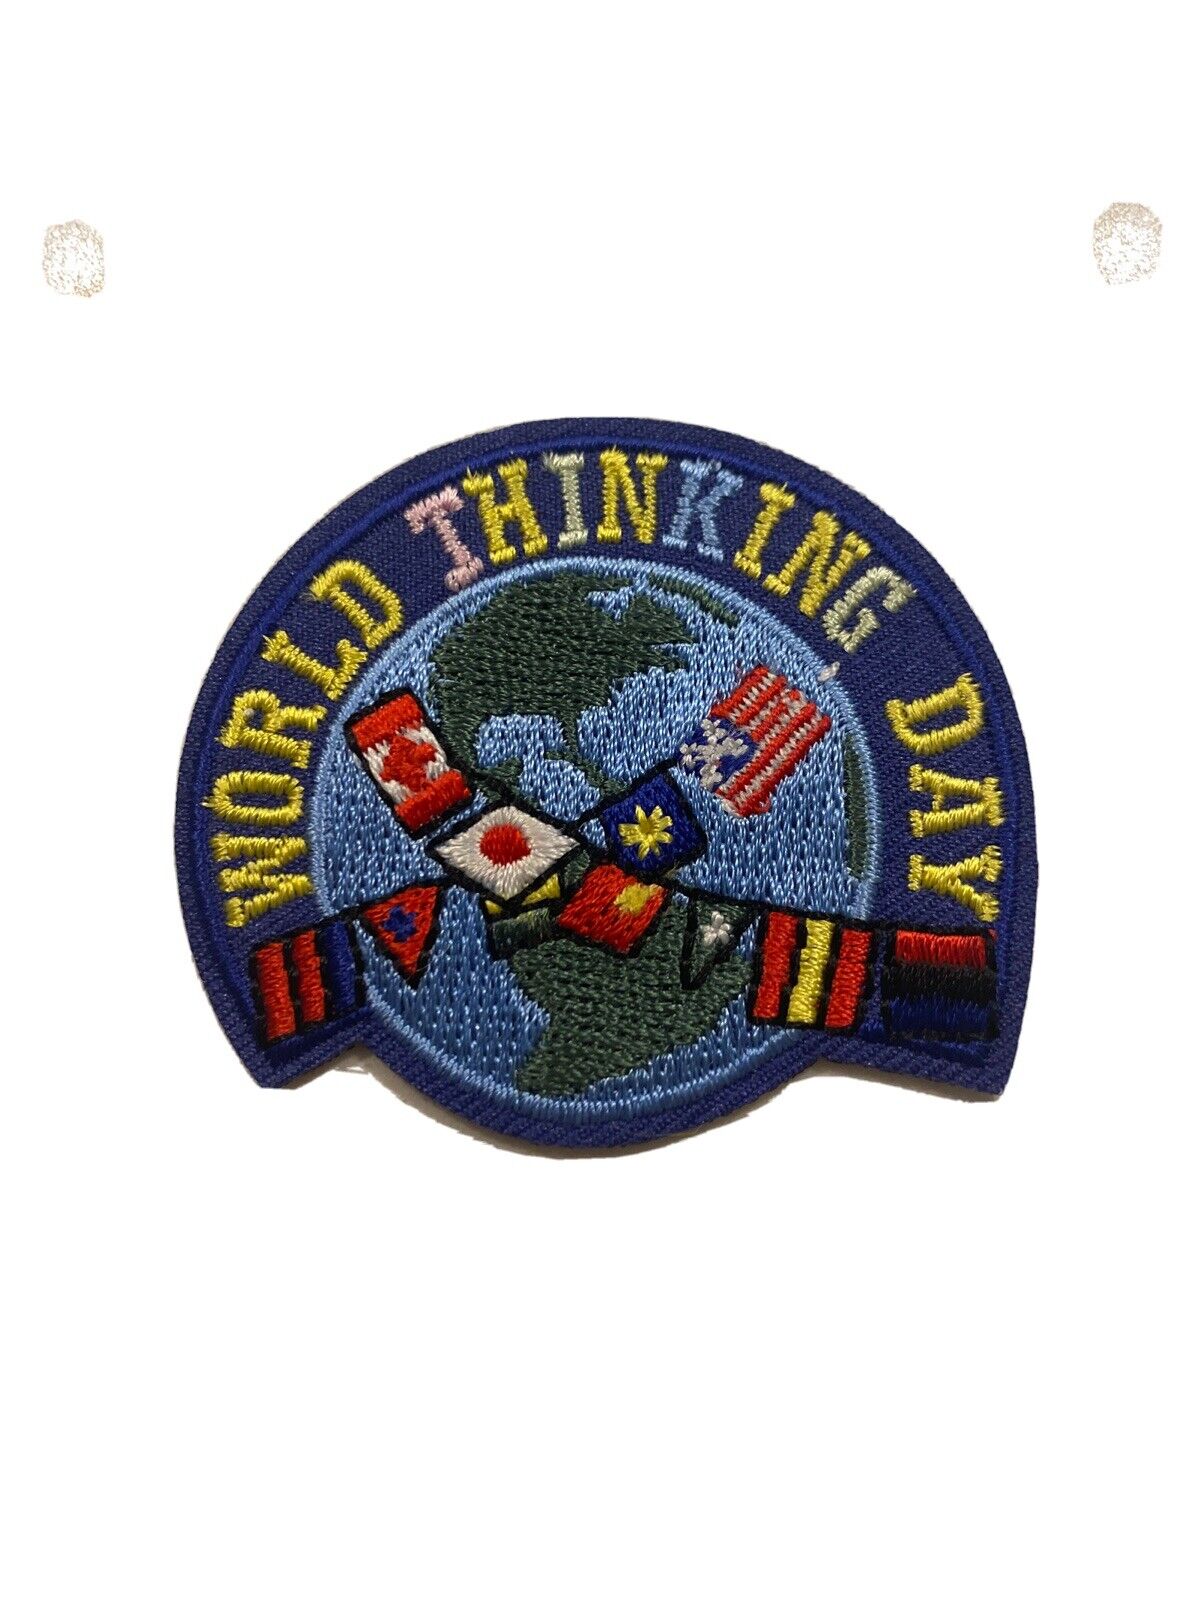 Girl Boy Cub Scout Girl Guide Fun Patch  - World thinking Day